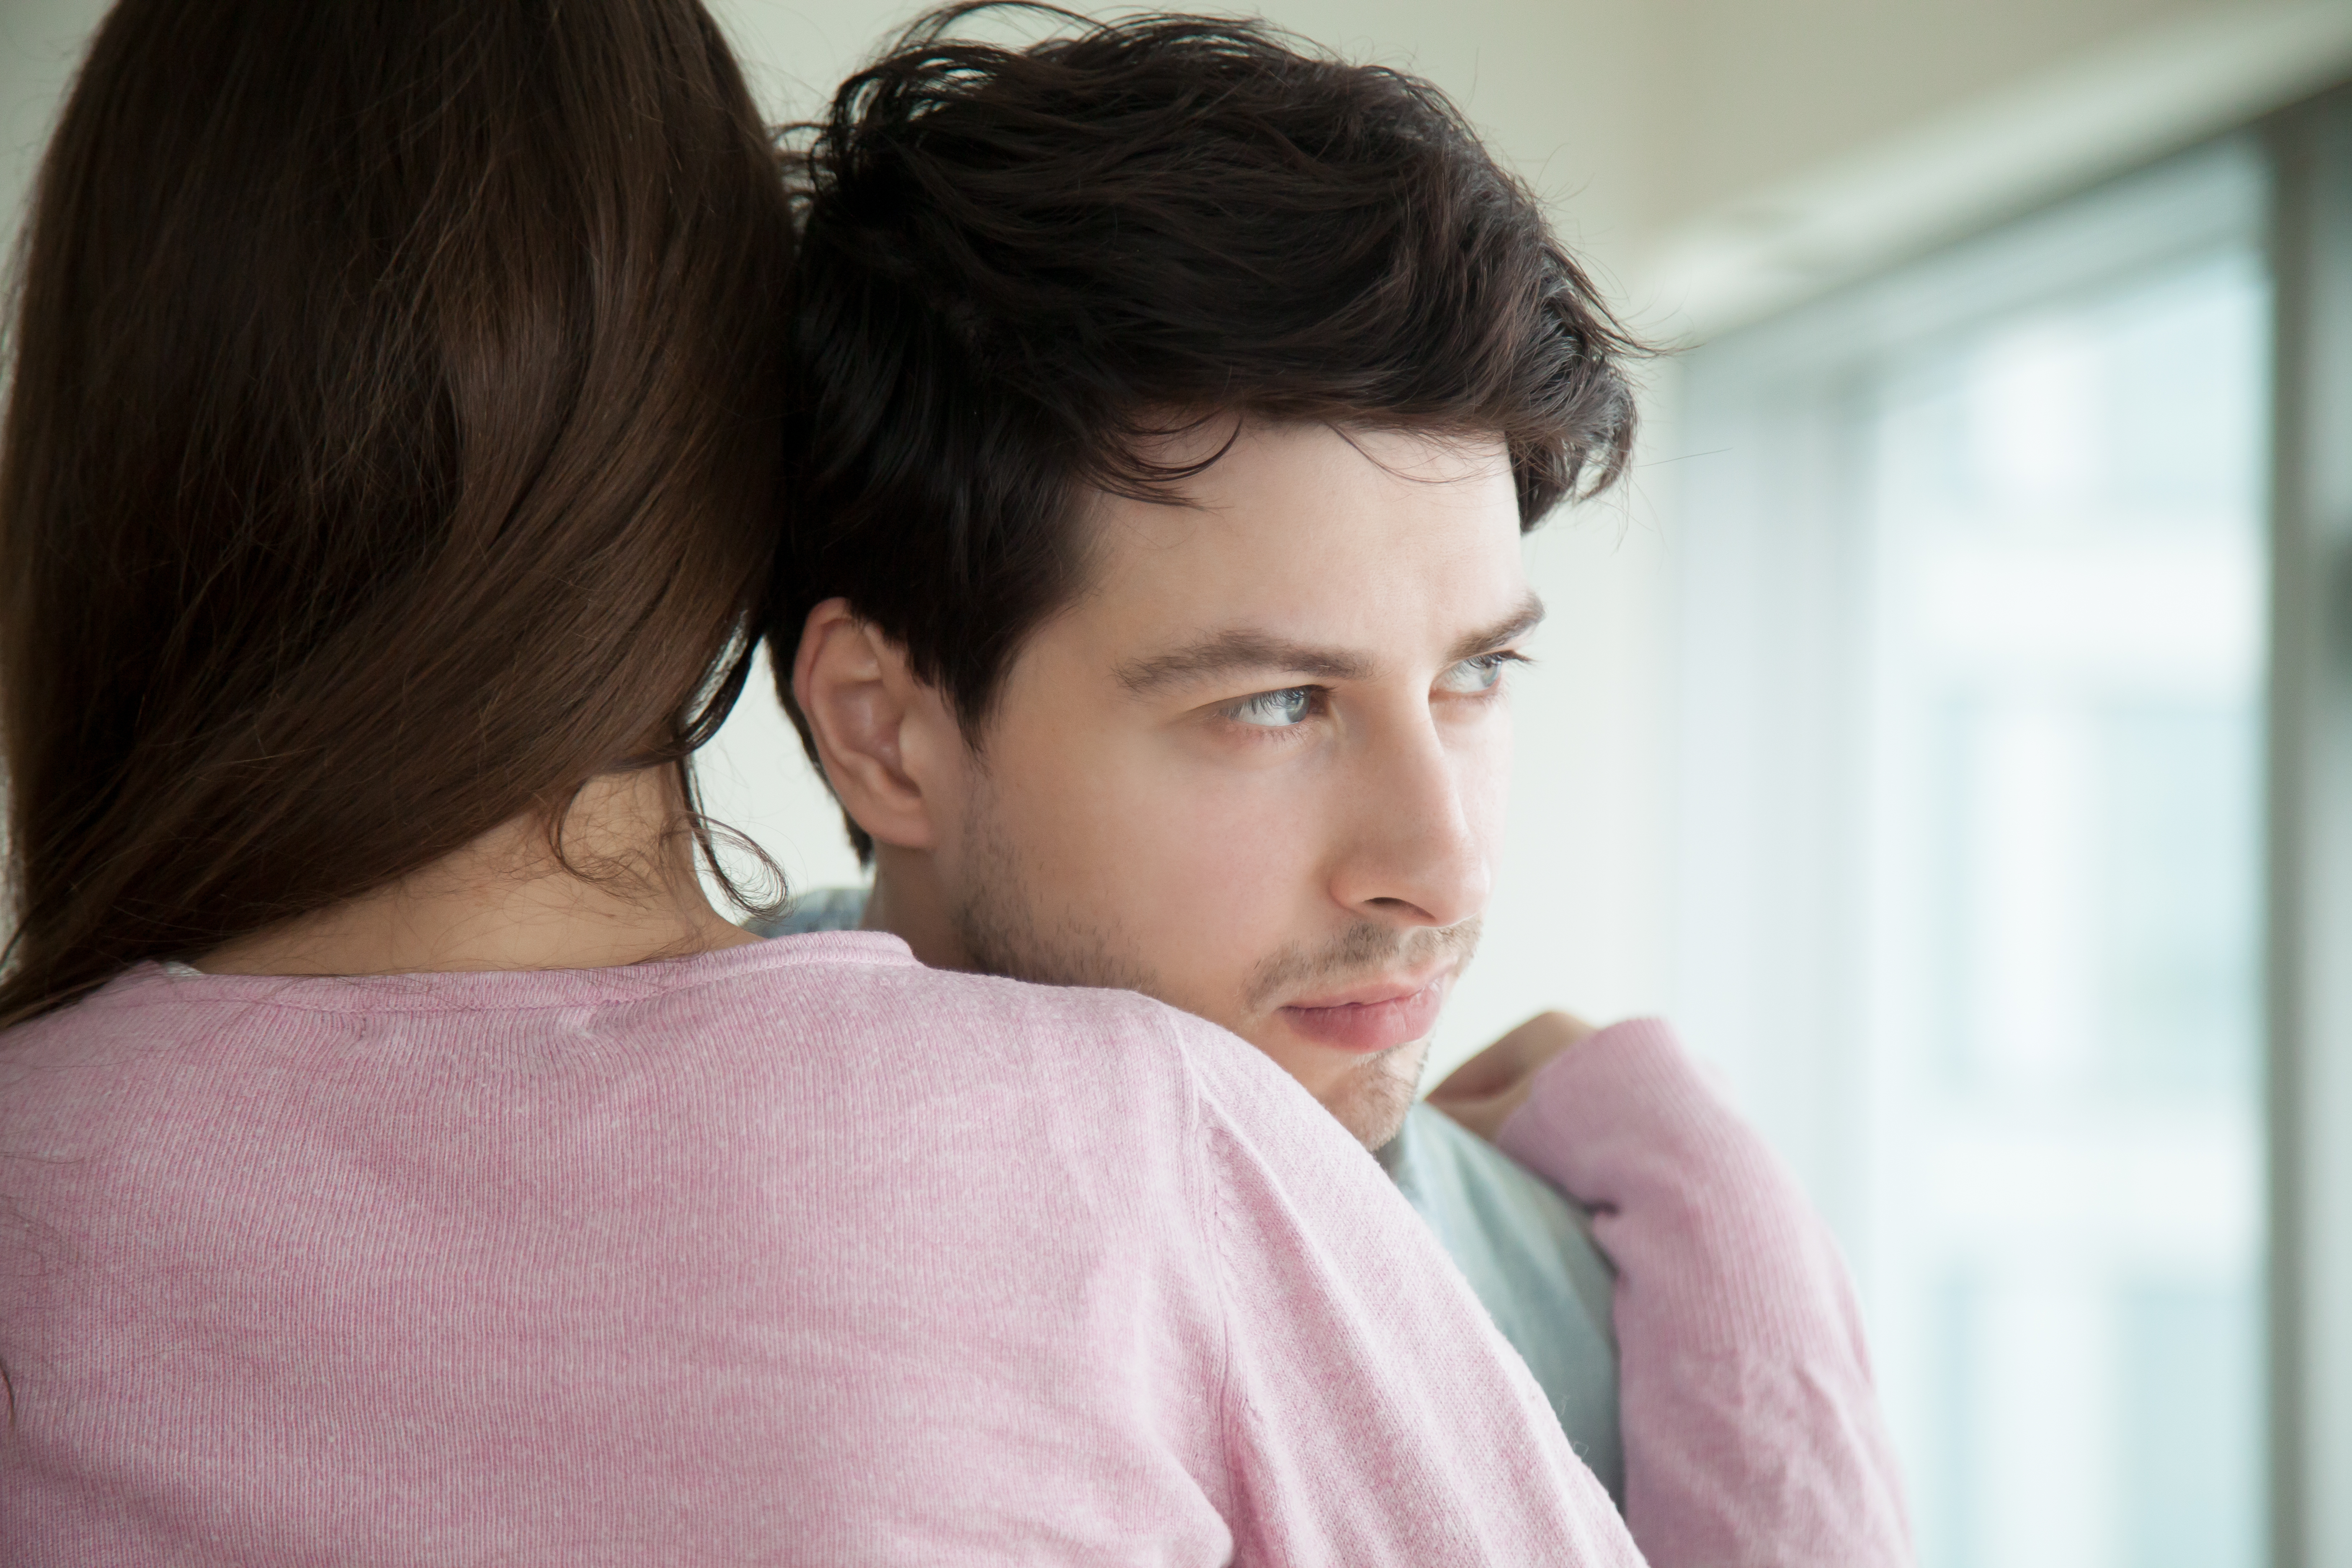 A man looks away through the window while his girlfriend hugs him for support | Source: Shutterstock